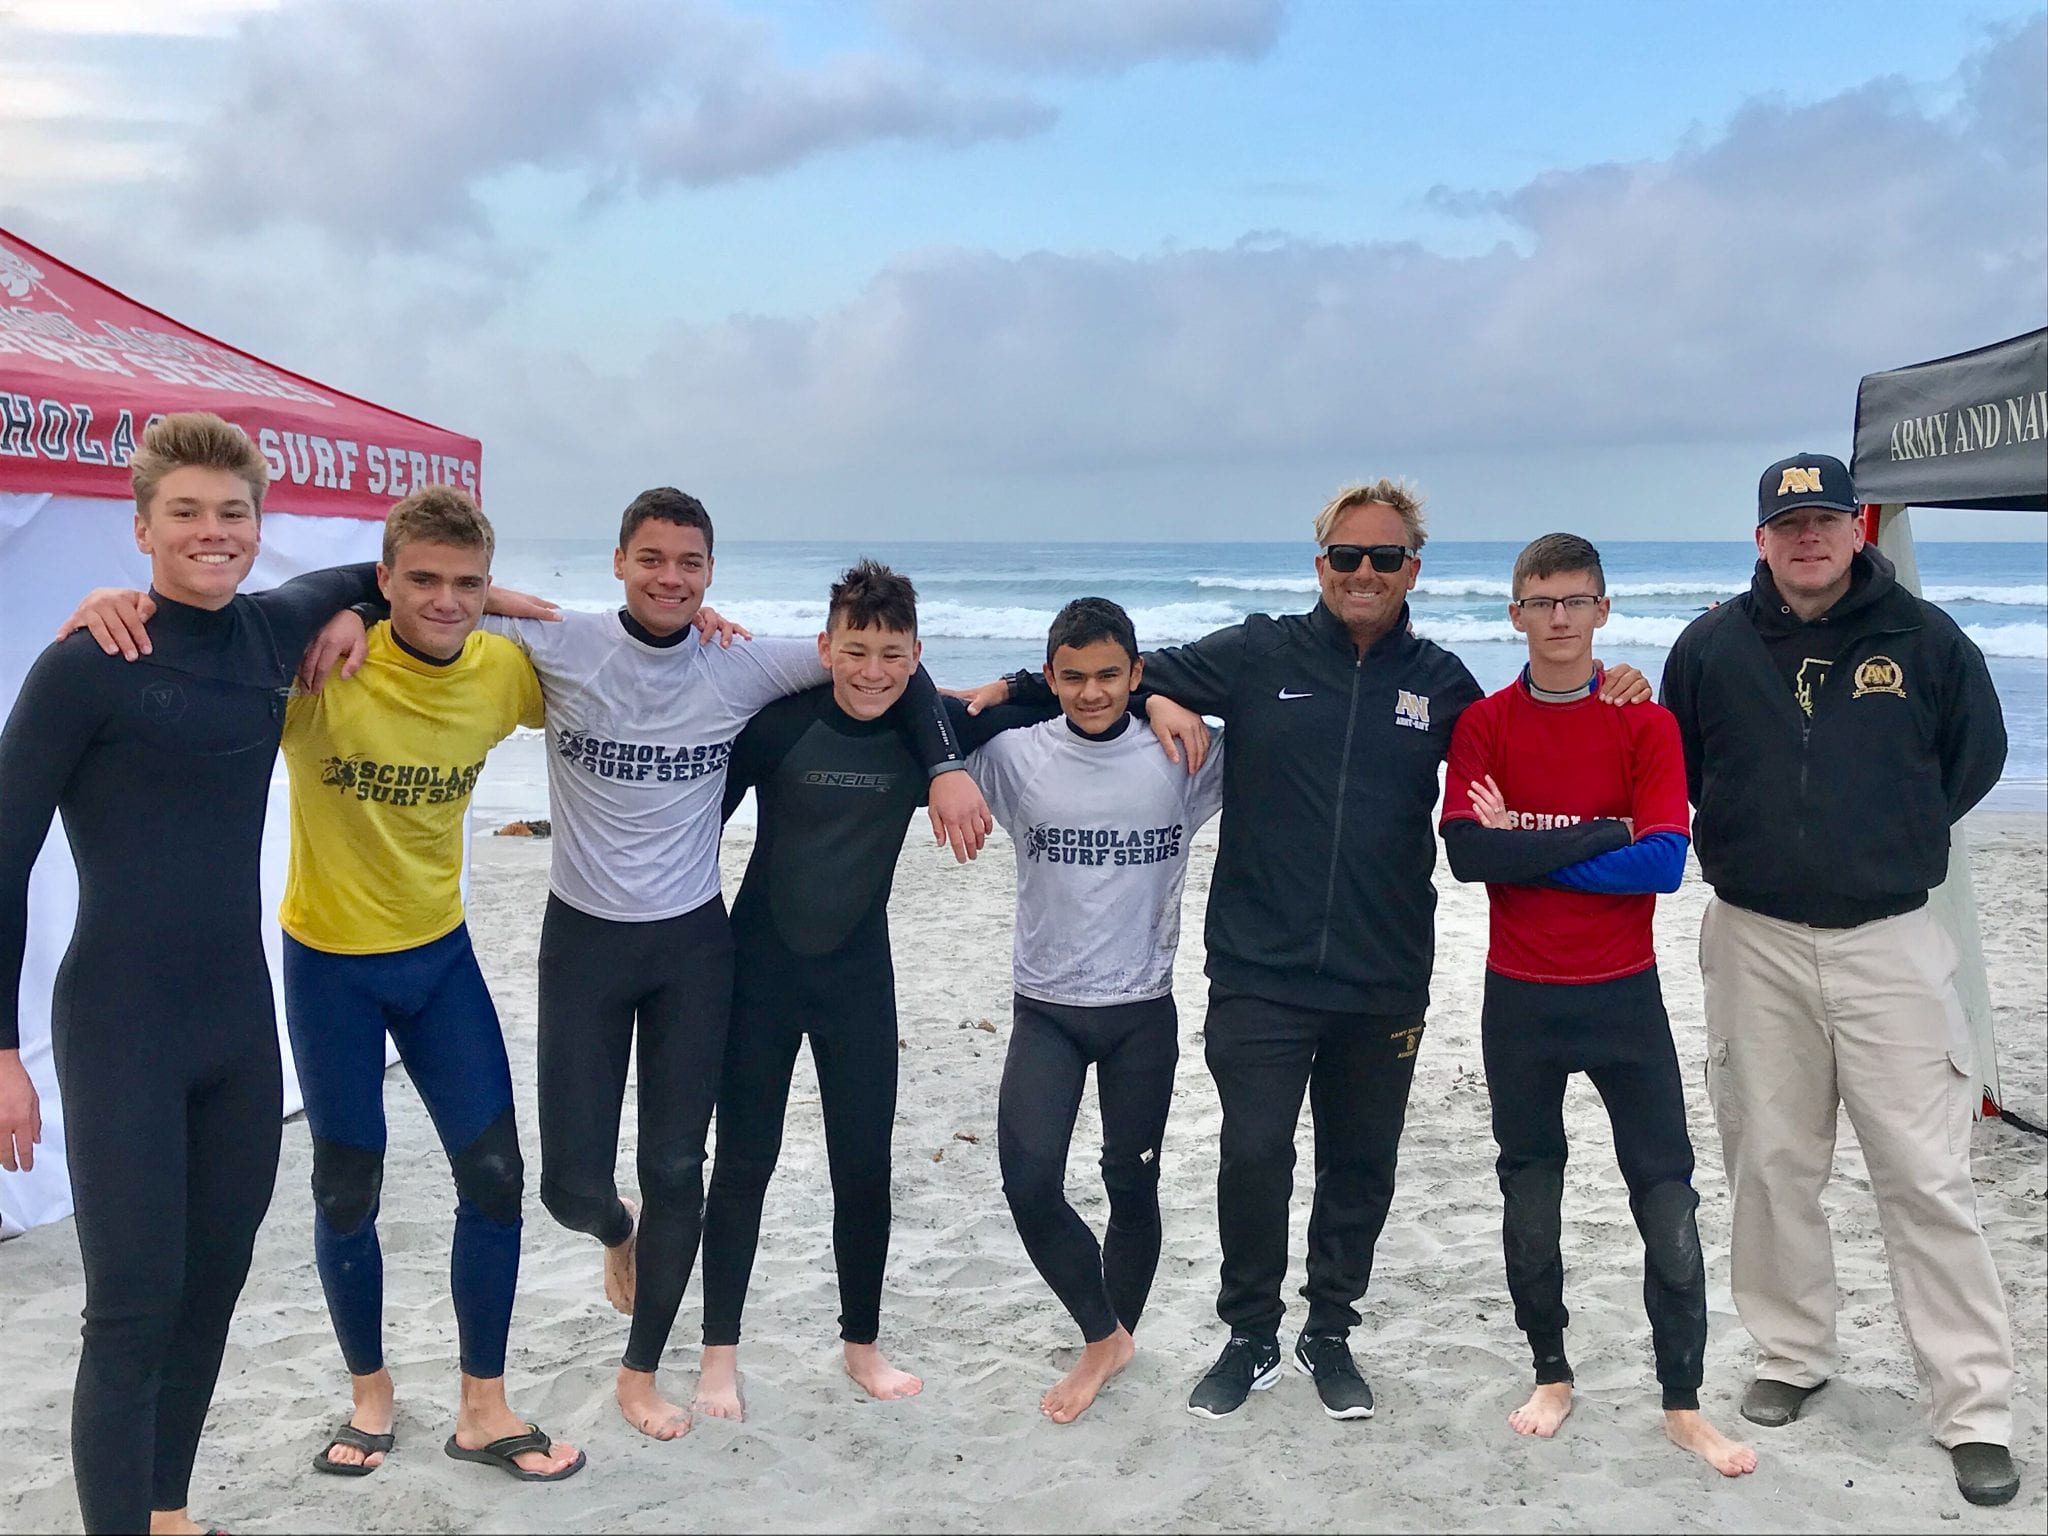 Surf Team Wins 2 Categories at the Scholastic Surf Series Division 5